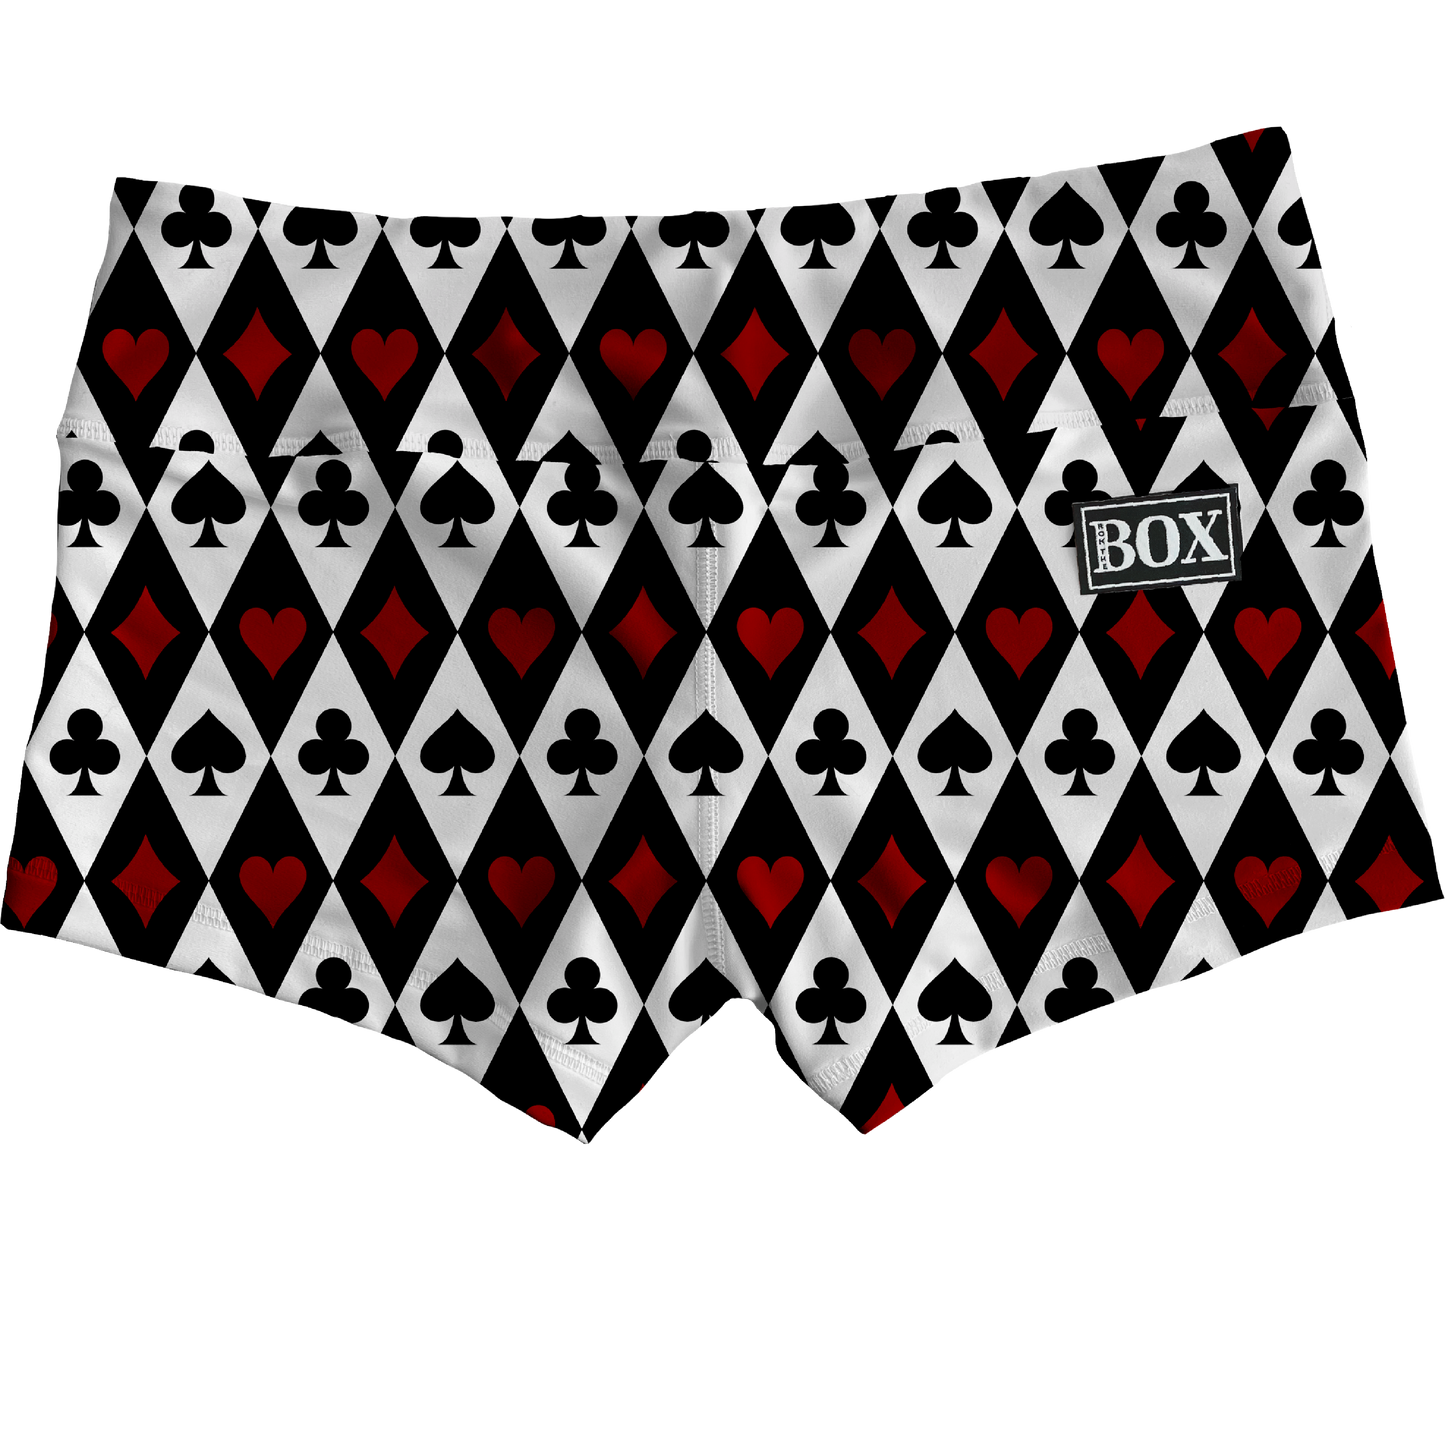 Queen of hearts Shorts (add lining for extra coverage)